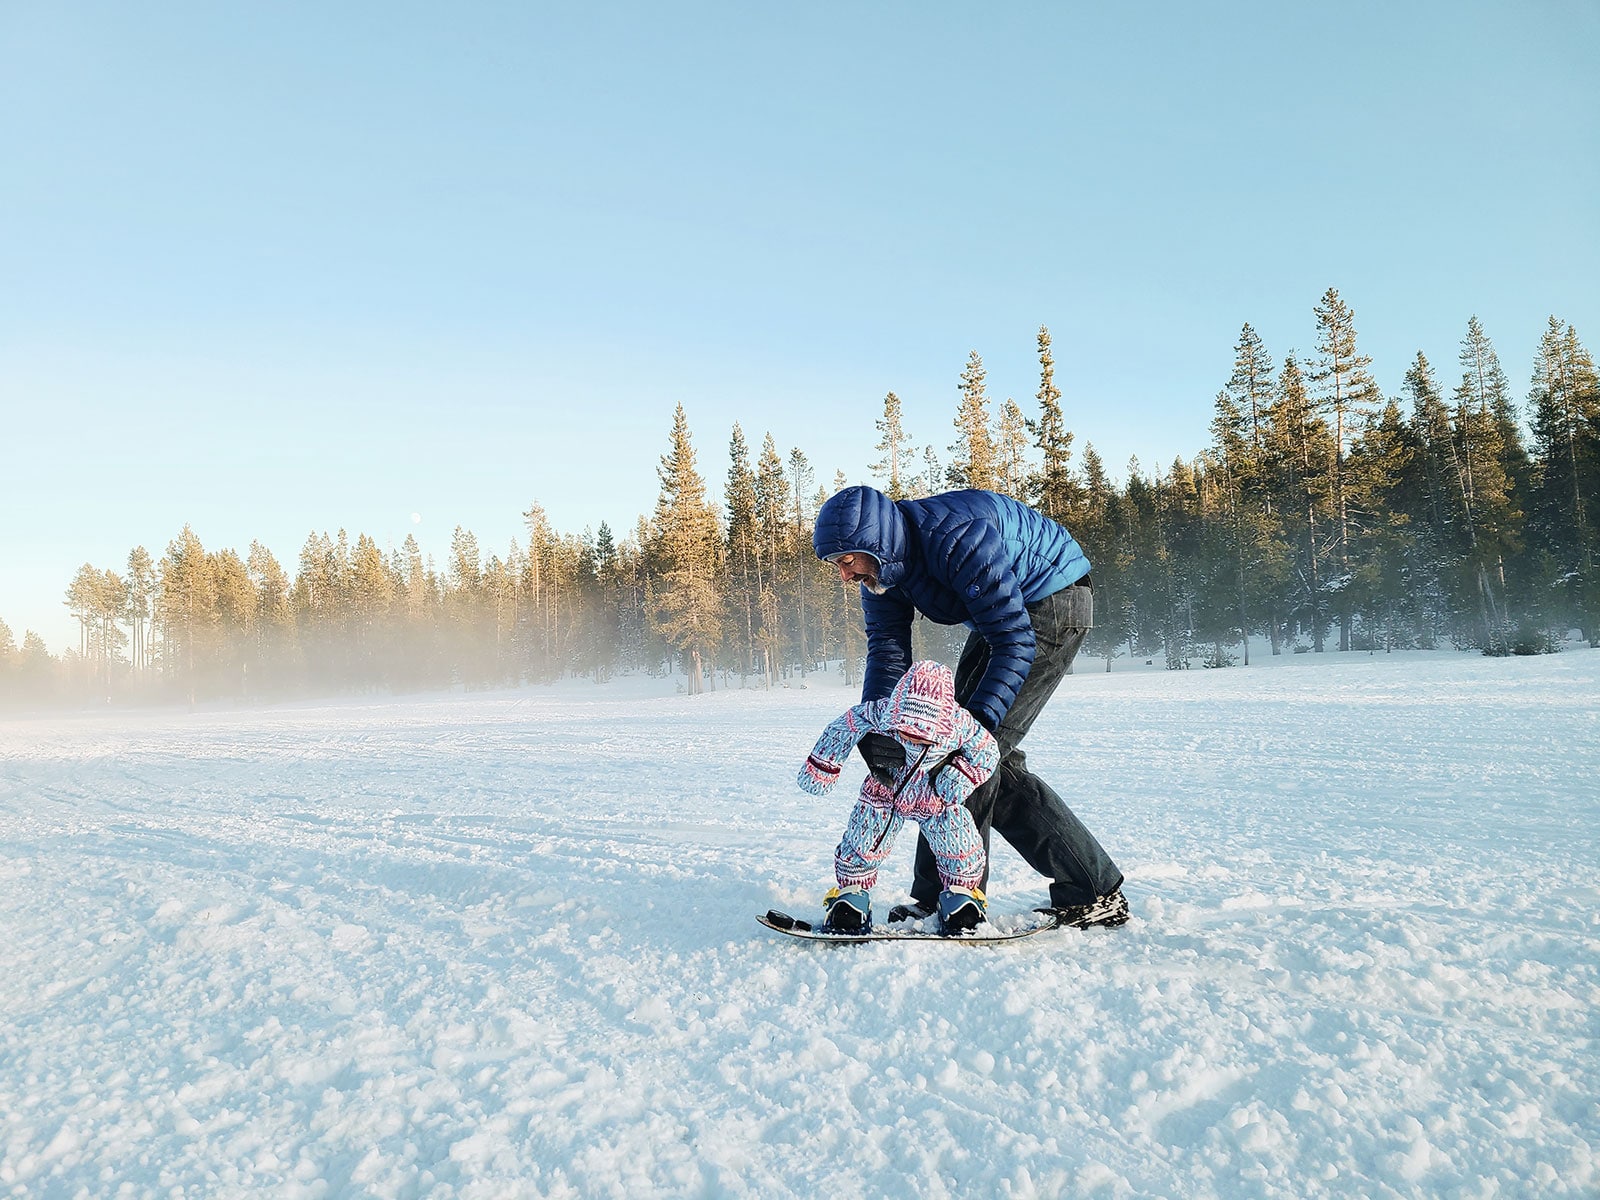 Toddler flopping like a ragdoll on her snowboard as her dad holds her from behind